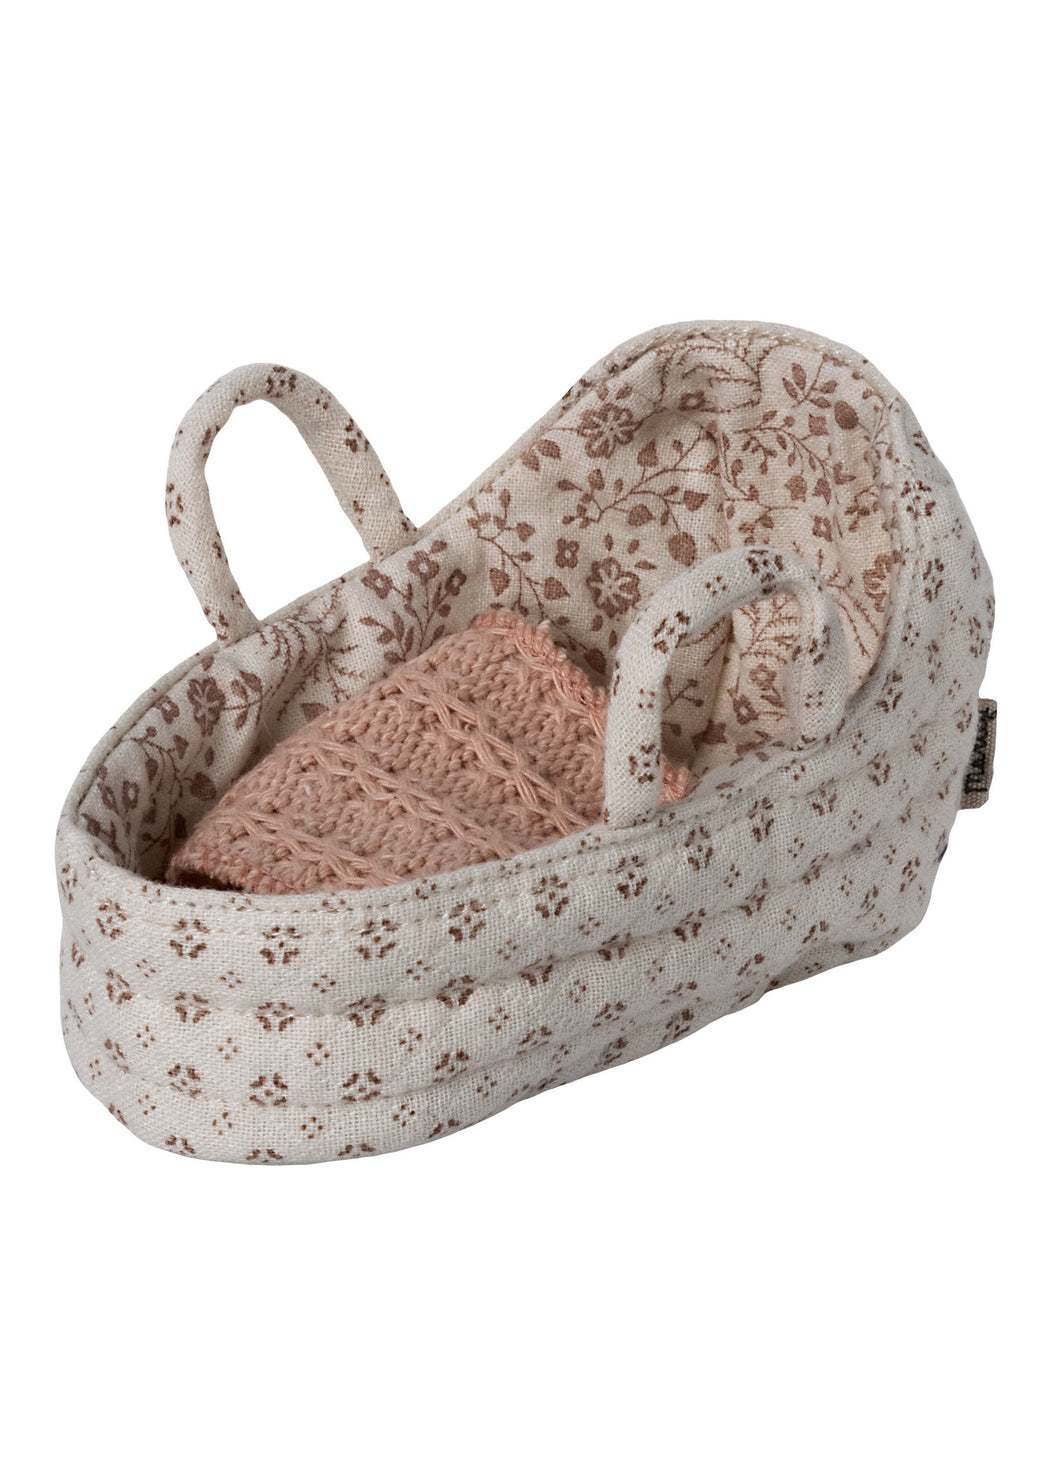 Baby Mouse Carry Cot